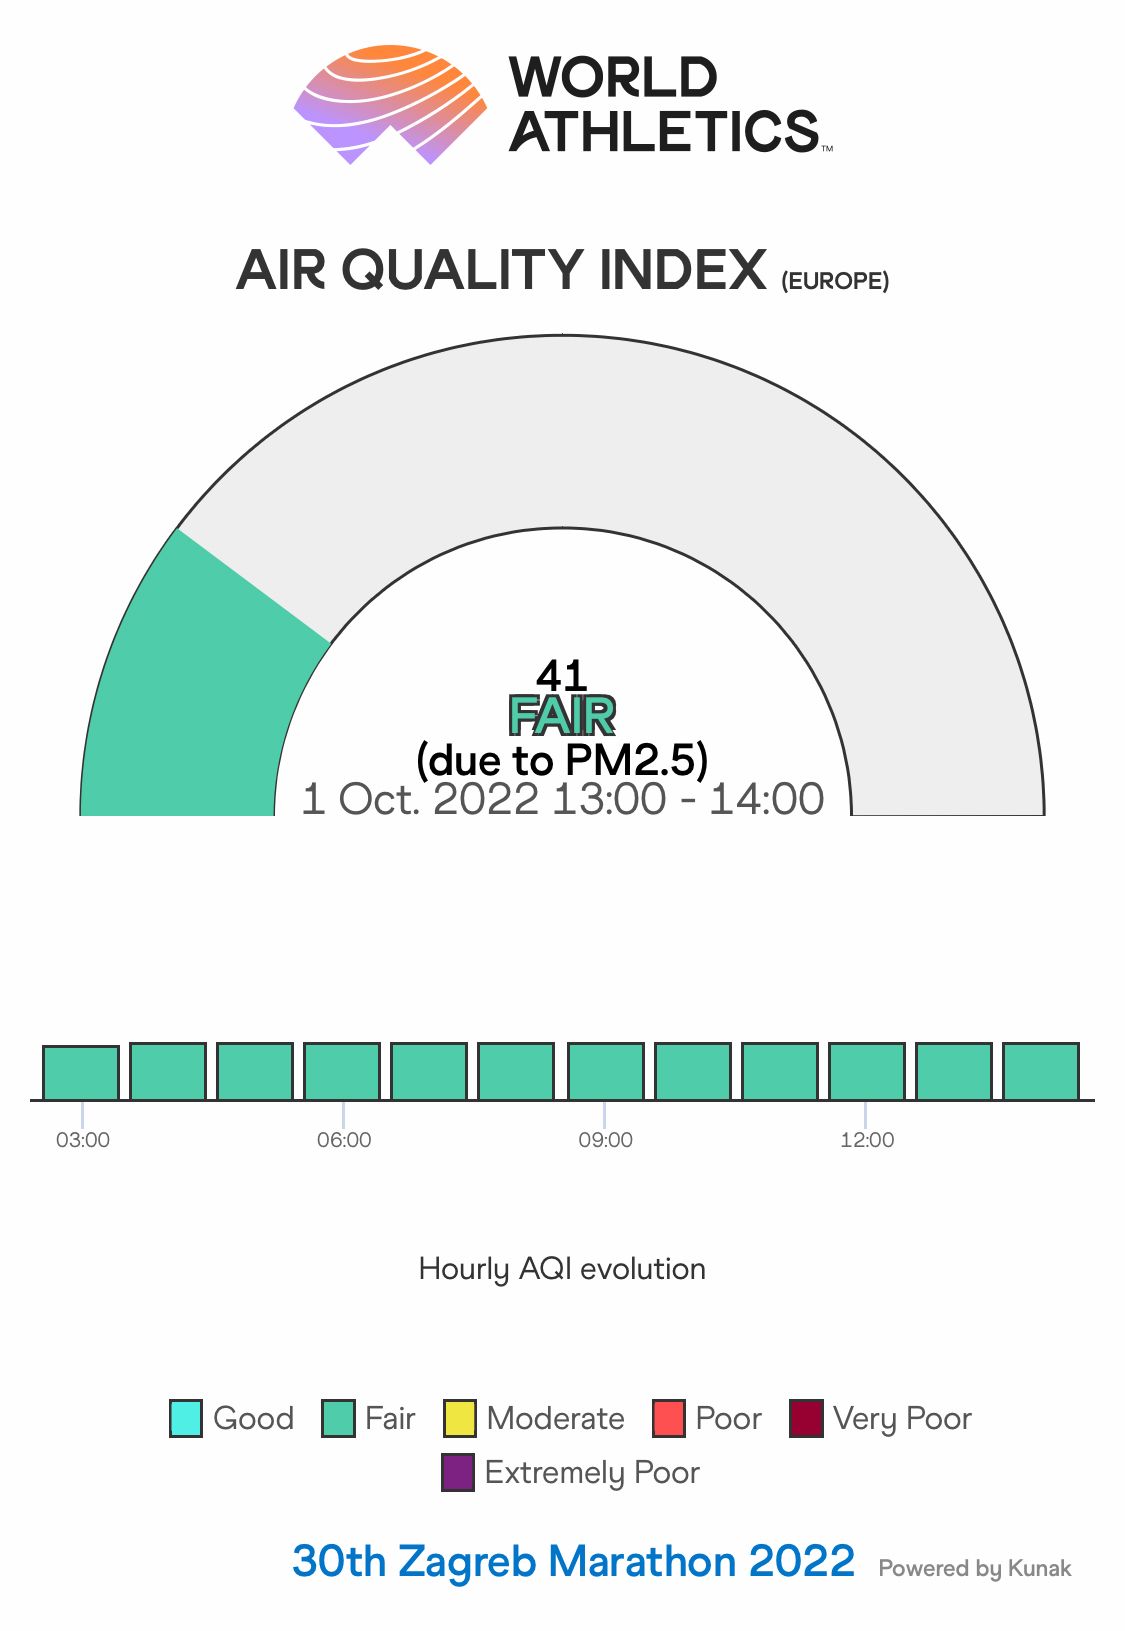 Air Quality Index widgets can be displayed at the finish line to engage the running community